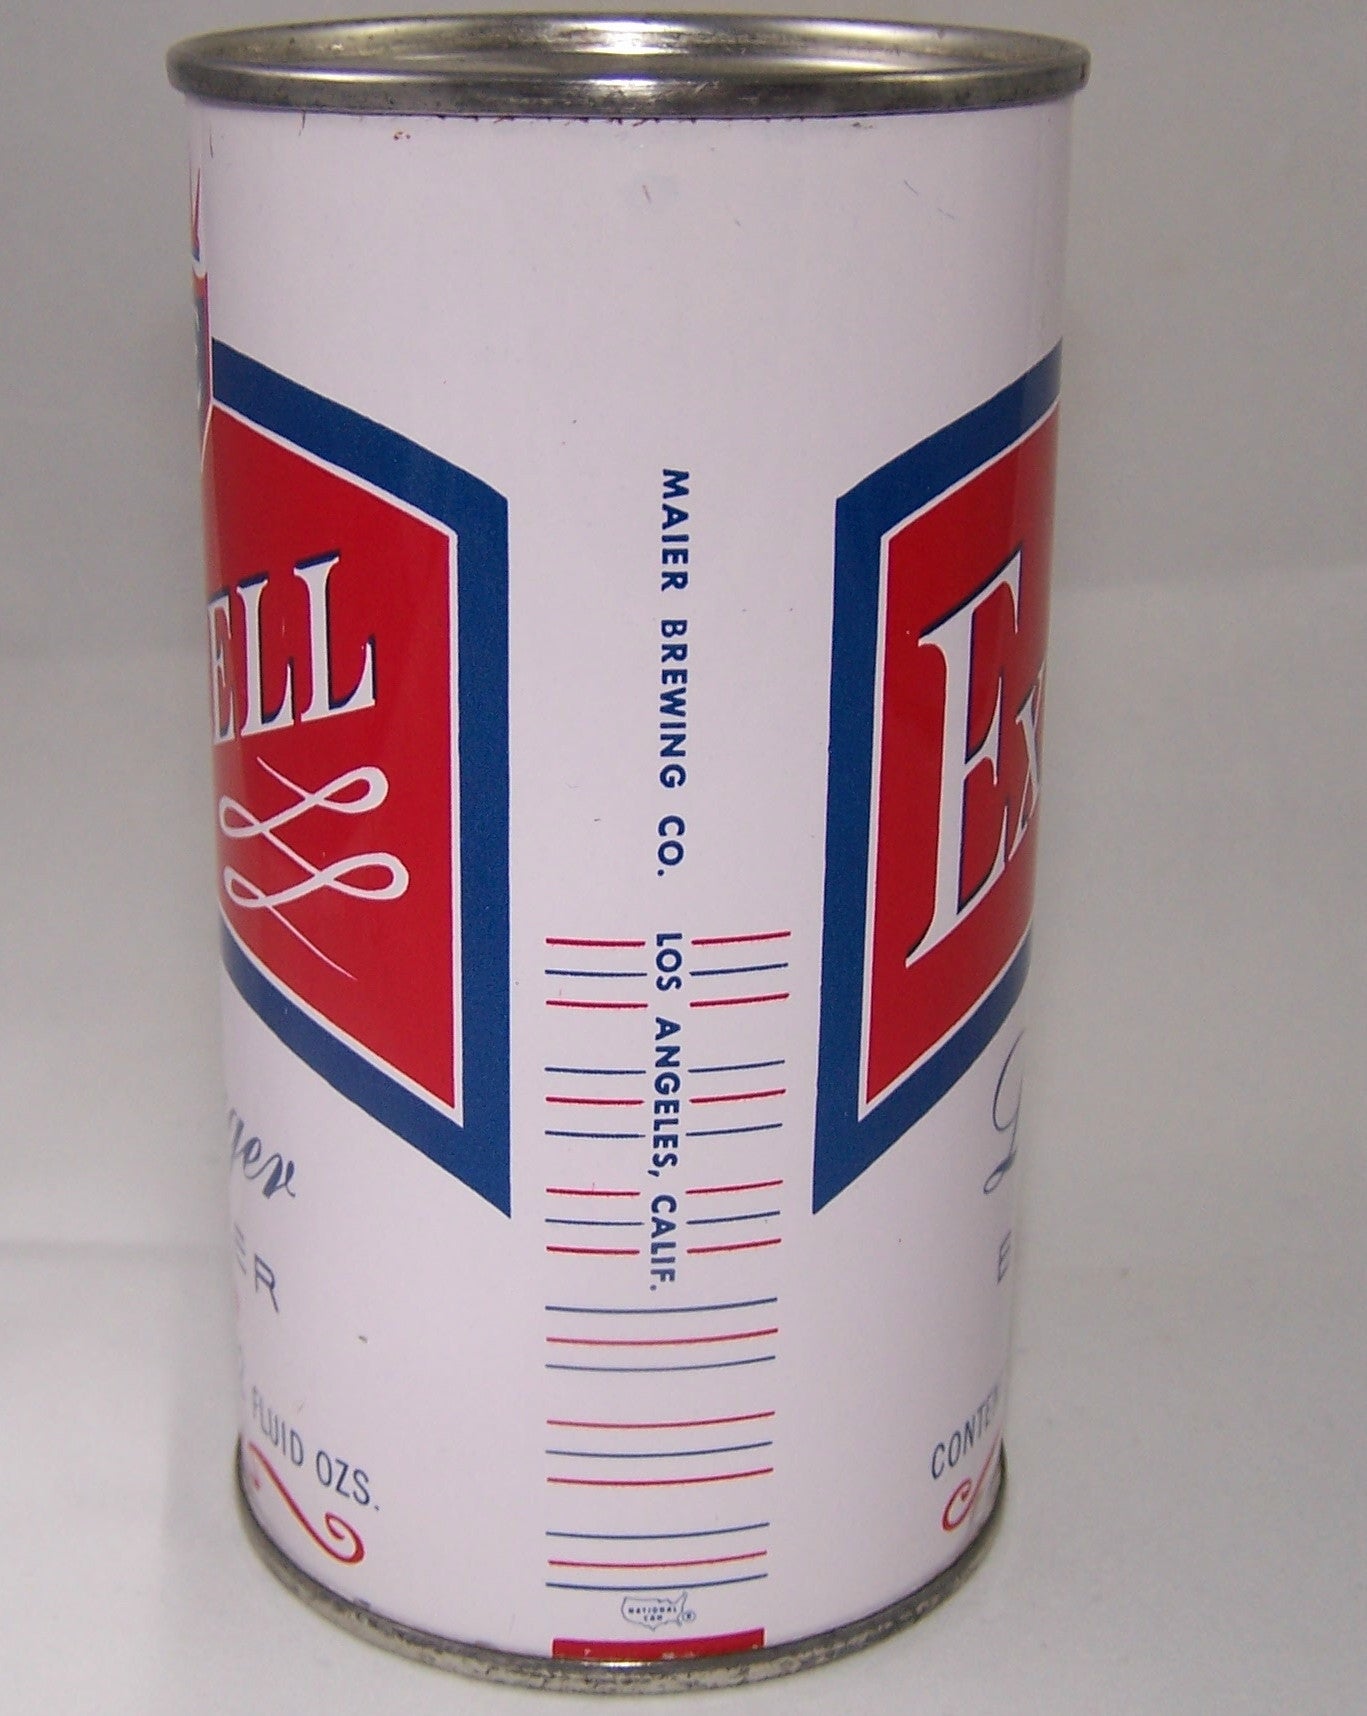 Excell Lager Beer, USBC 61-14, Grade 1 Sold on 10/09/17